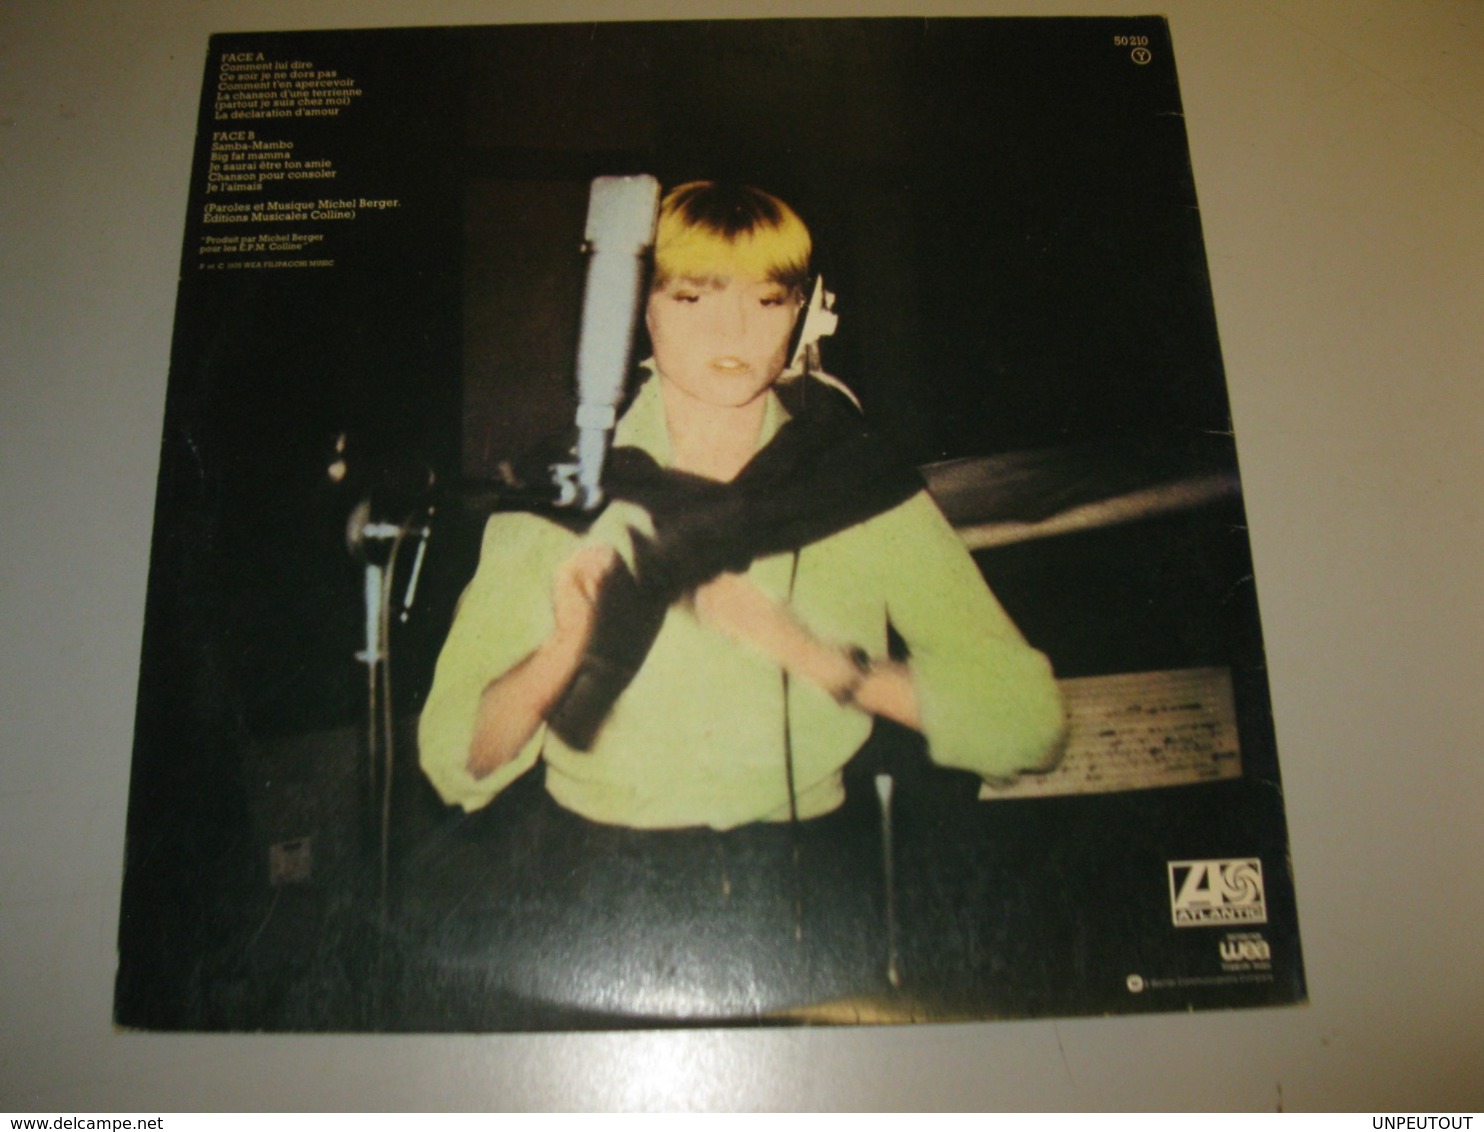 VINYLE FRANCE GALL 33 T ATLANTIC / WEA (1975) - Other - French Music